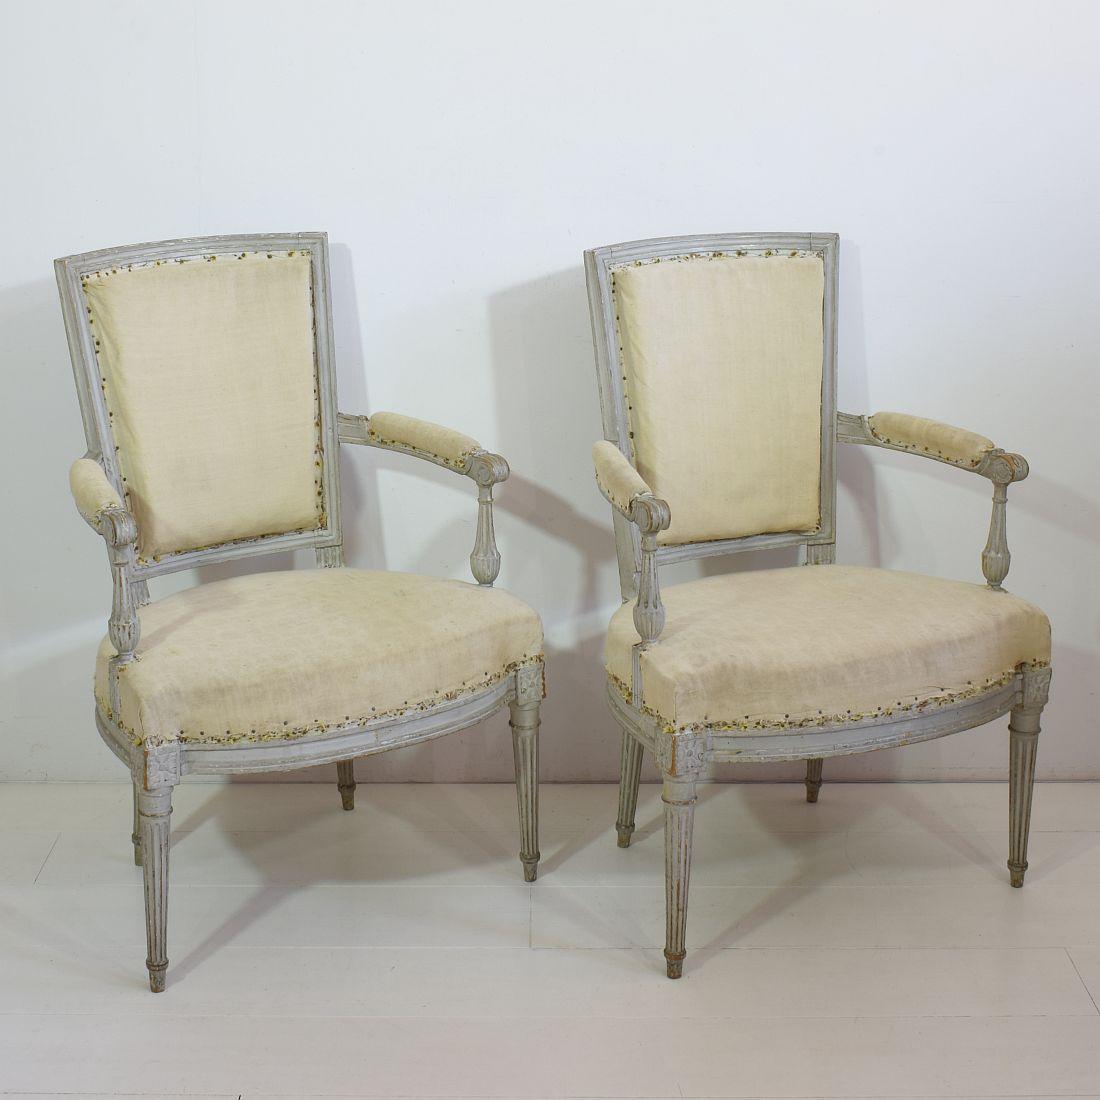 Hand-Crafted 18th Century French Pair of Louis XVI Chairs